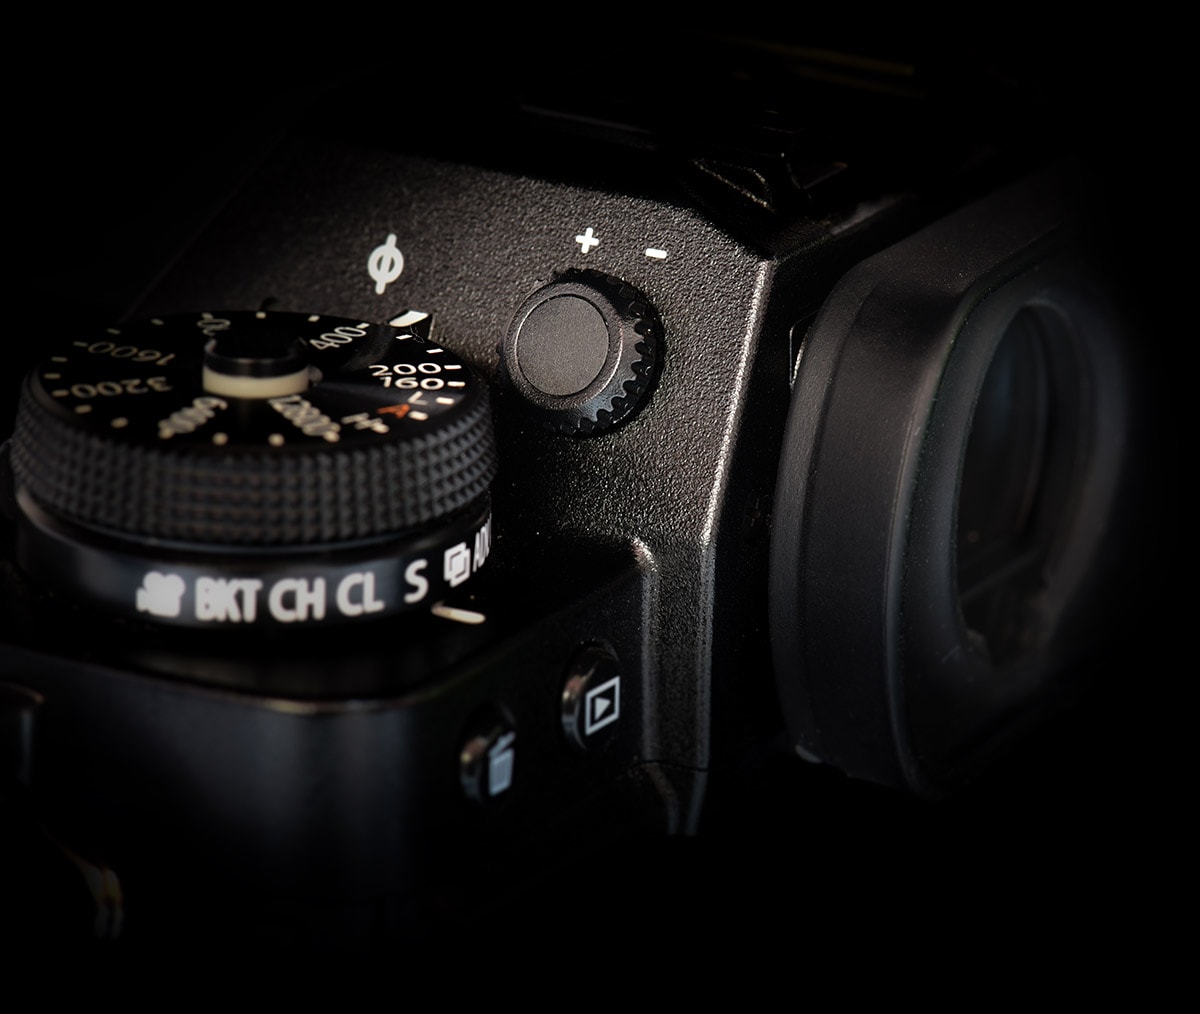 diopter adjustment dial on Fujifilm X-T3